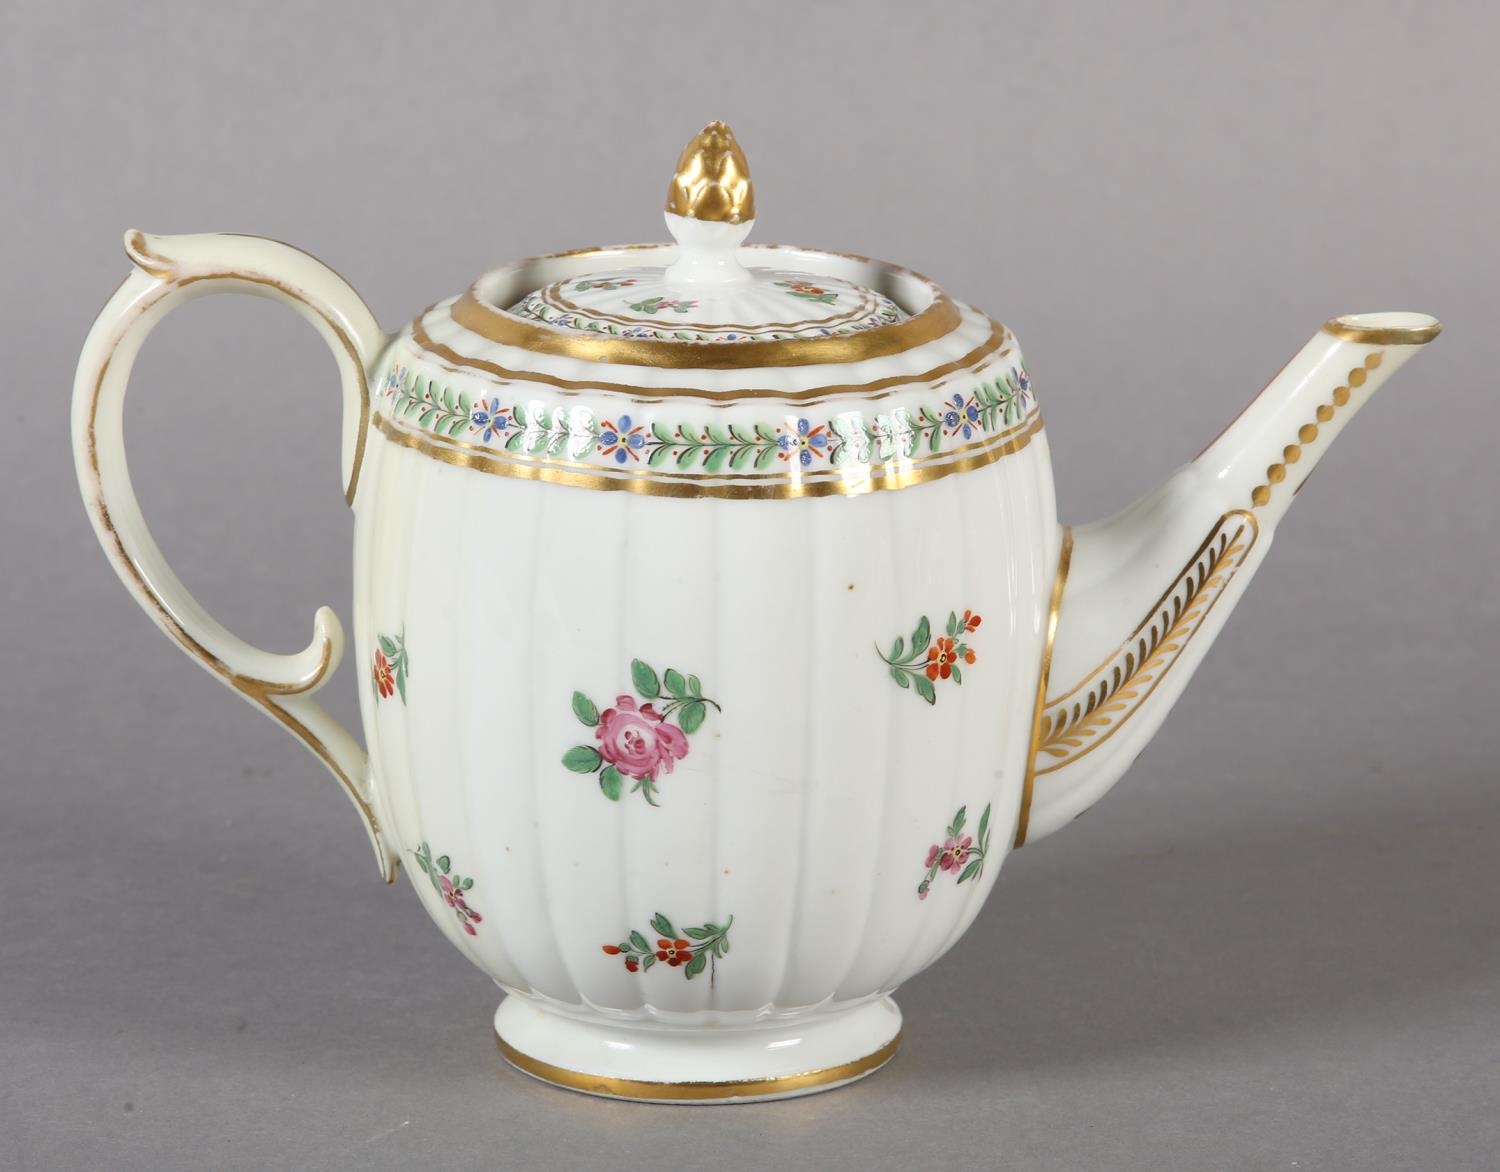 An 18th century teapot, the lid having an acorn gilt finial, the fluted body of barrel shape painted - Image 9 of 9